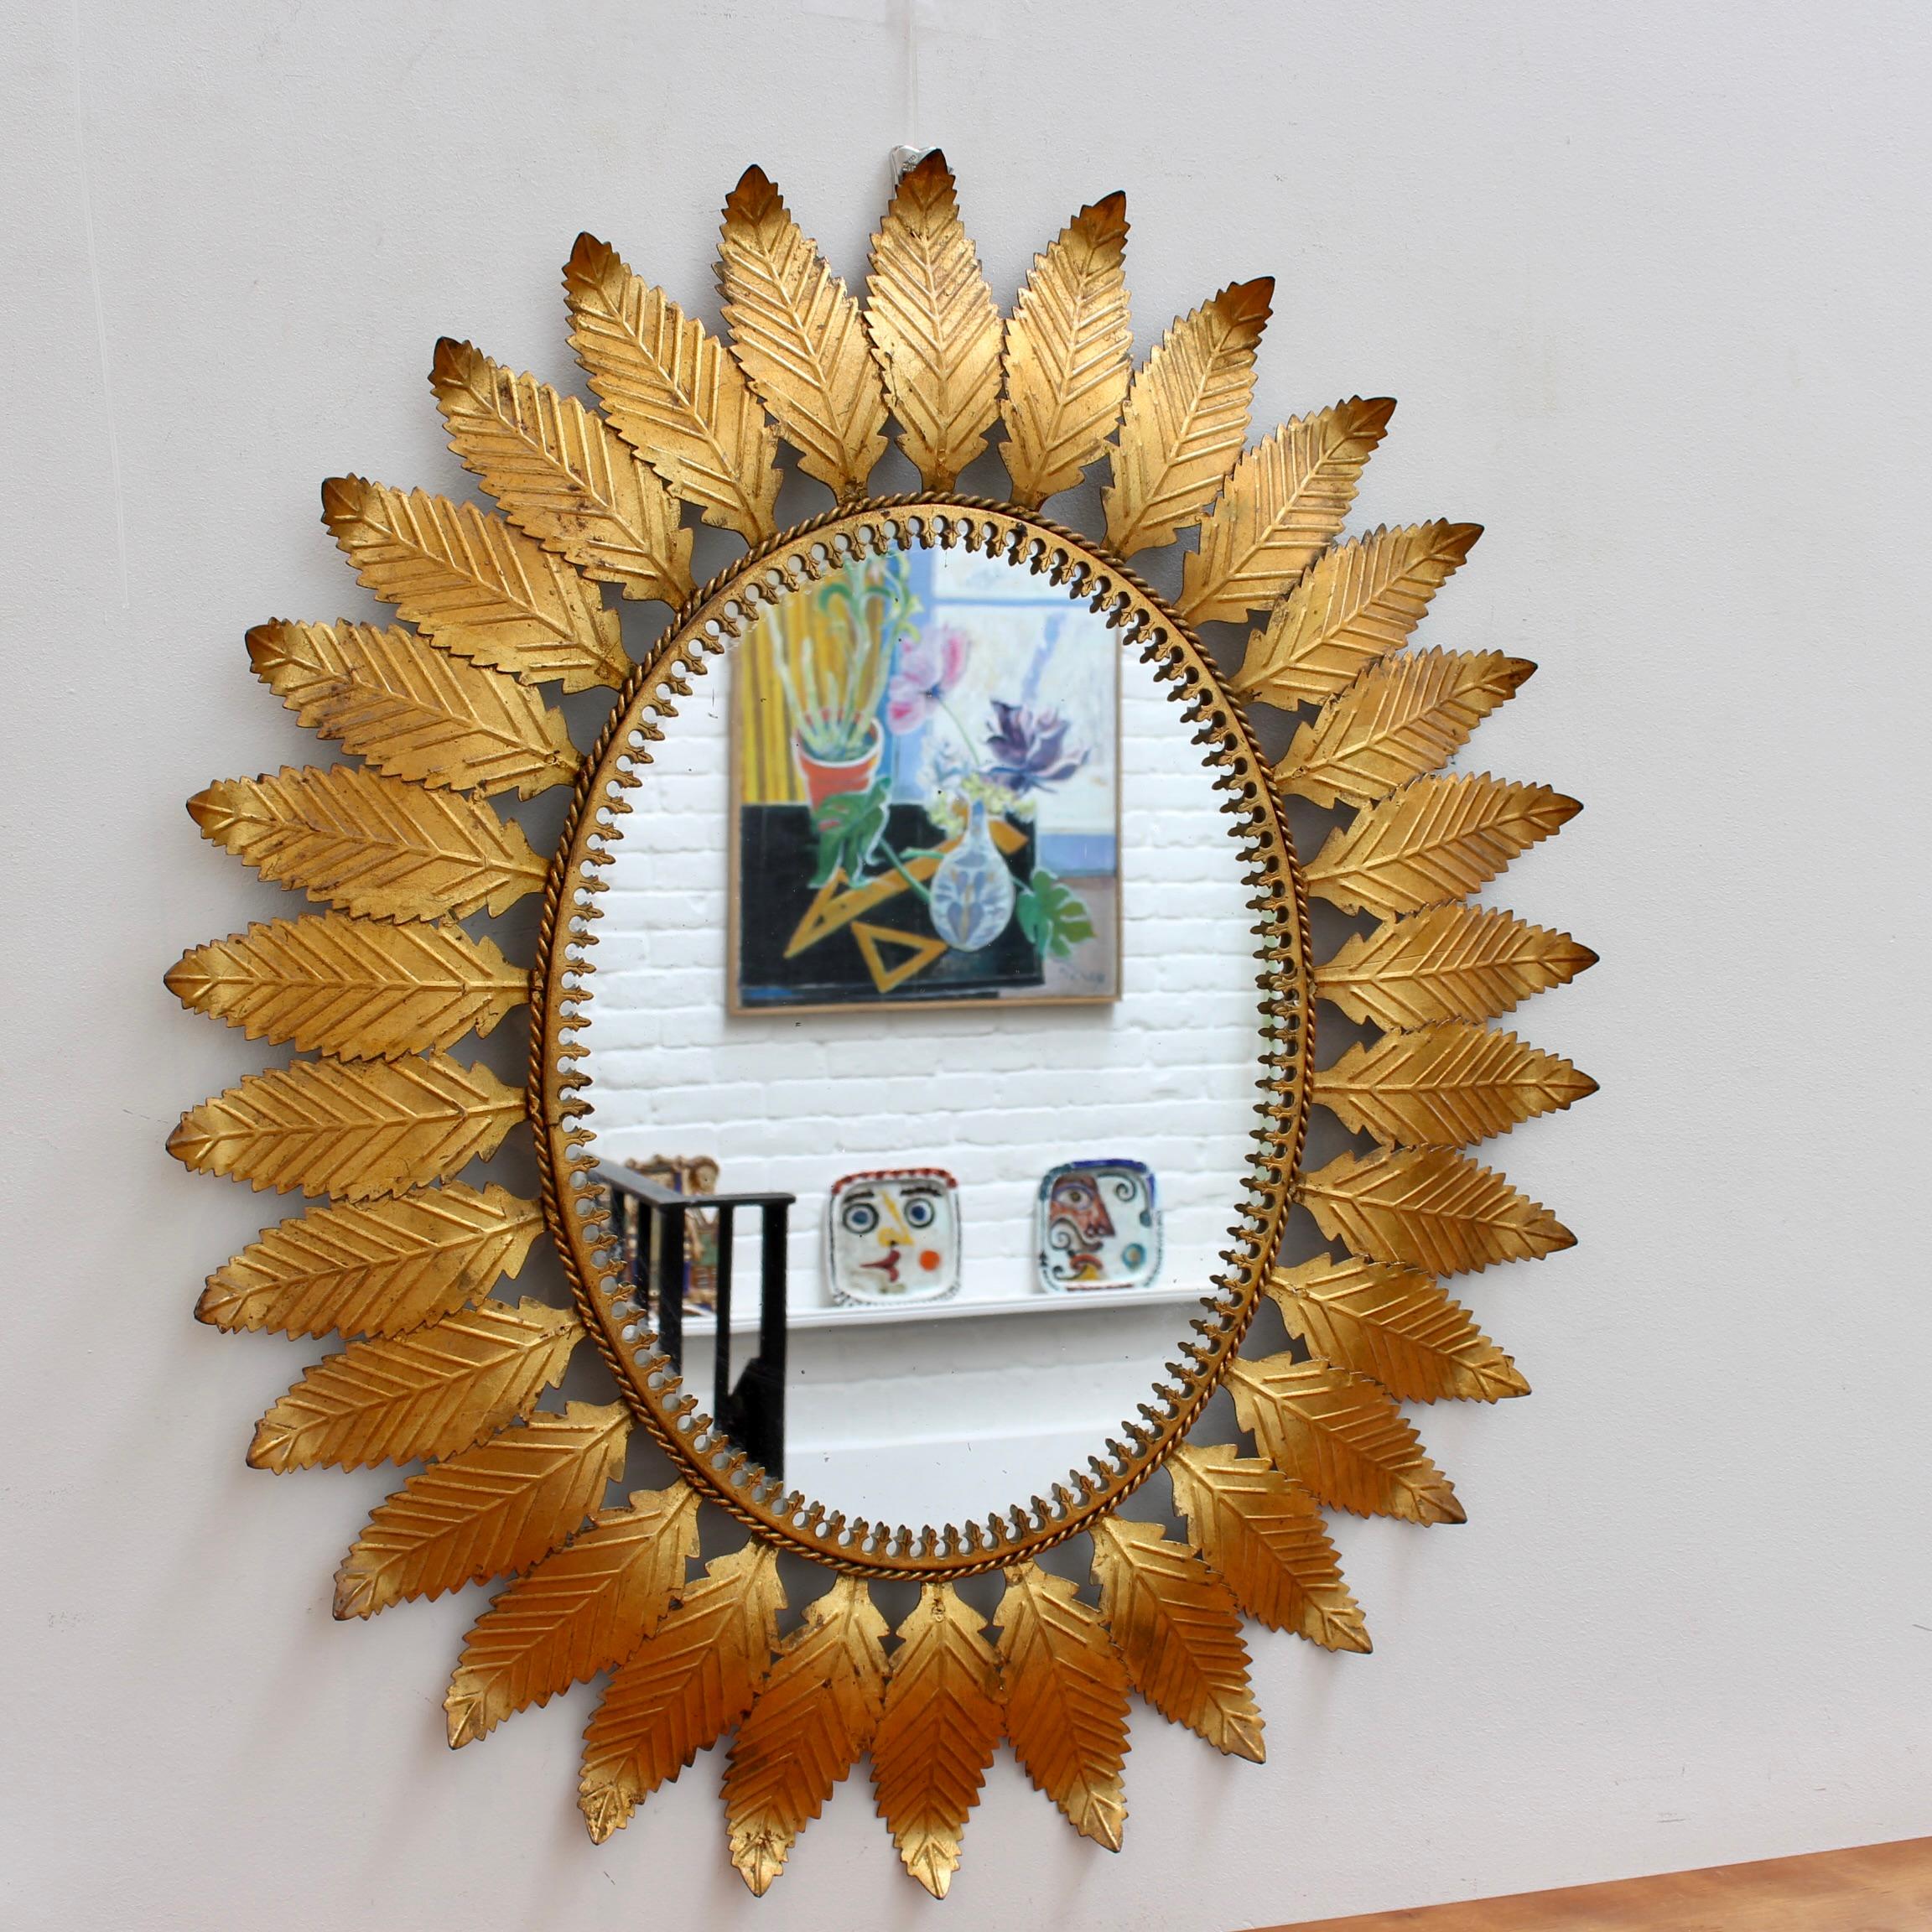 Spanish gilt metal sunburst mirror (circa 1970s) with leaf motif rays and a repeating pattern of rope bordering the glass. The lustrous frame is in overall good condition with lovely golden highlights - there are some small spots on the mirror